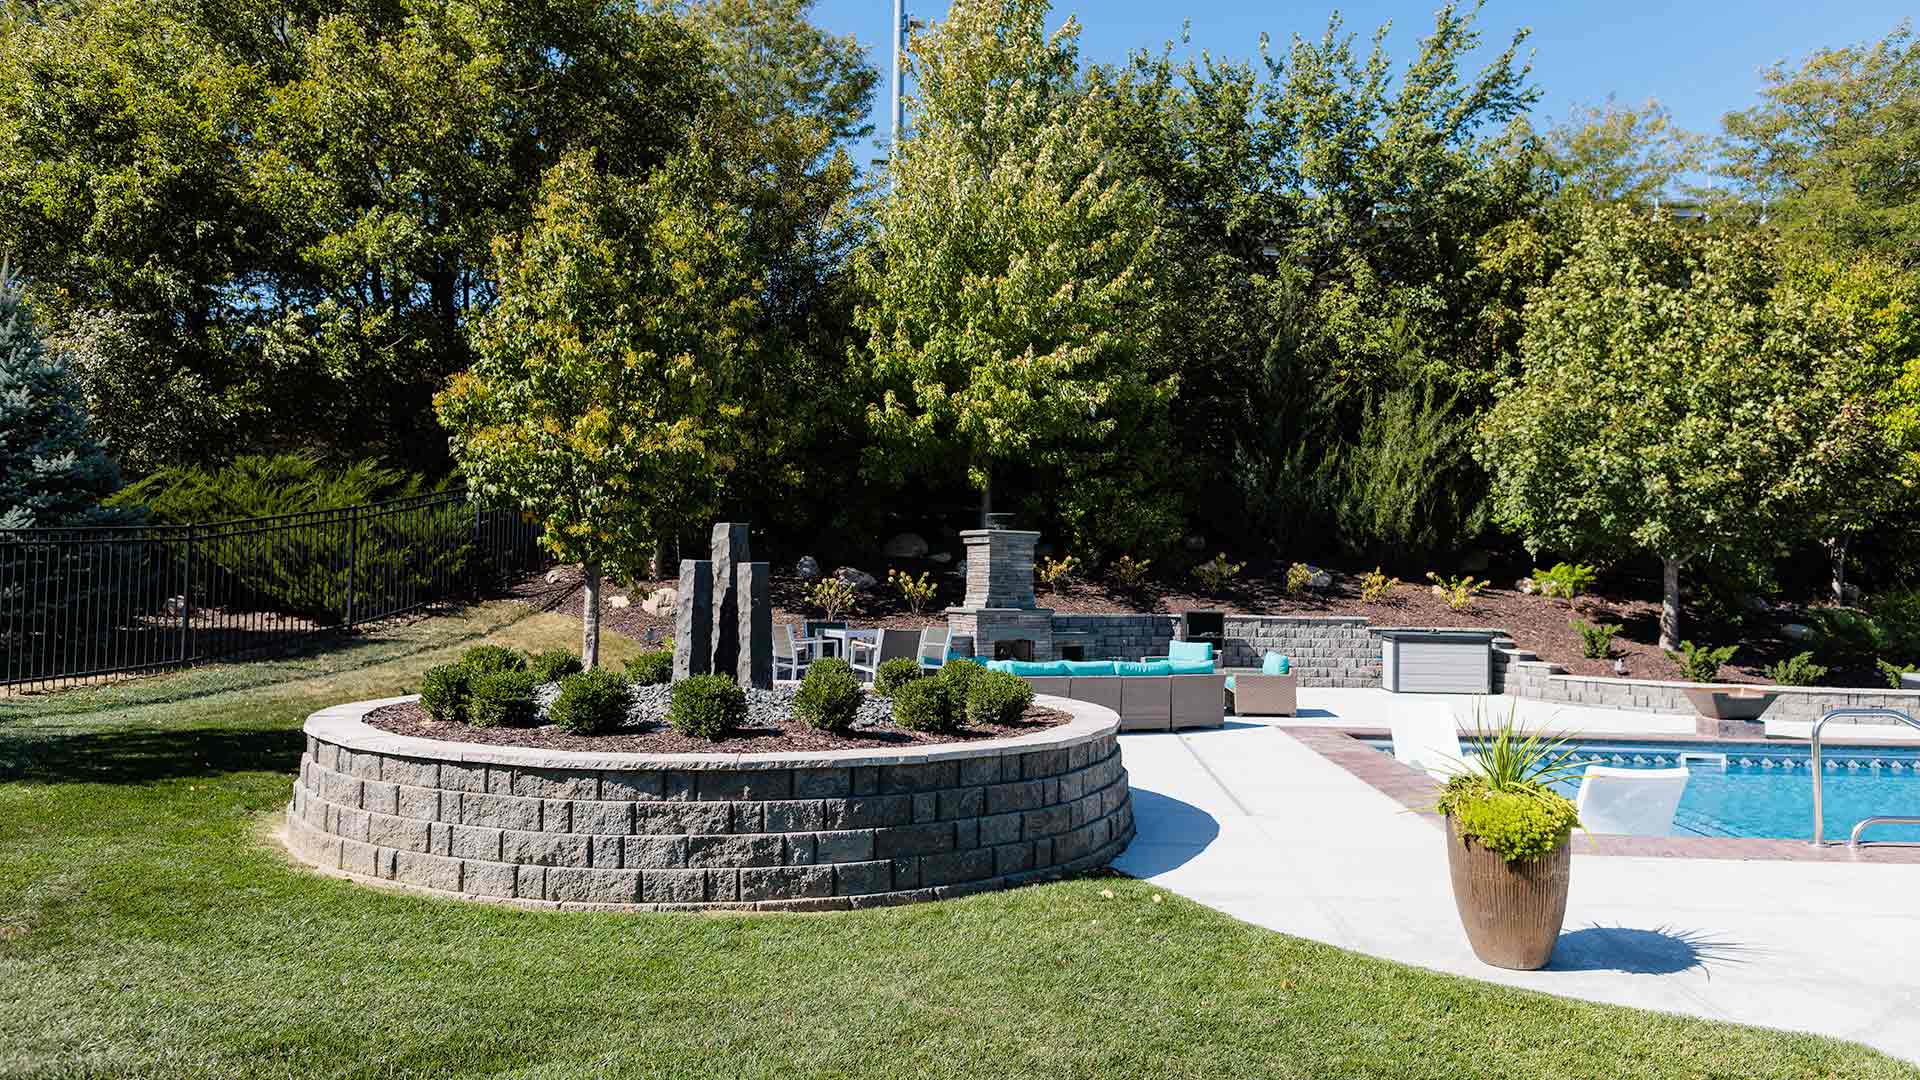 Backyard Project in Omaha, NE Includes a Pool, Retaining Wall, Landscaping & More